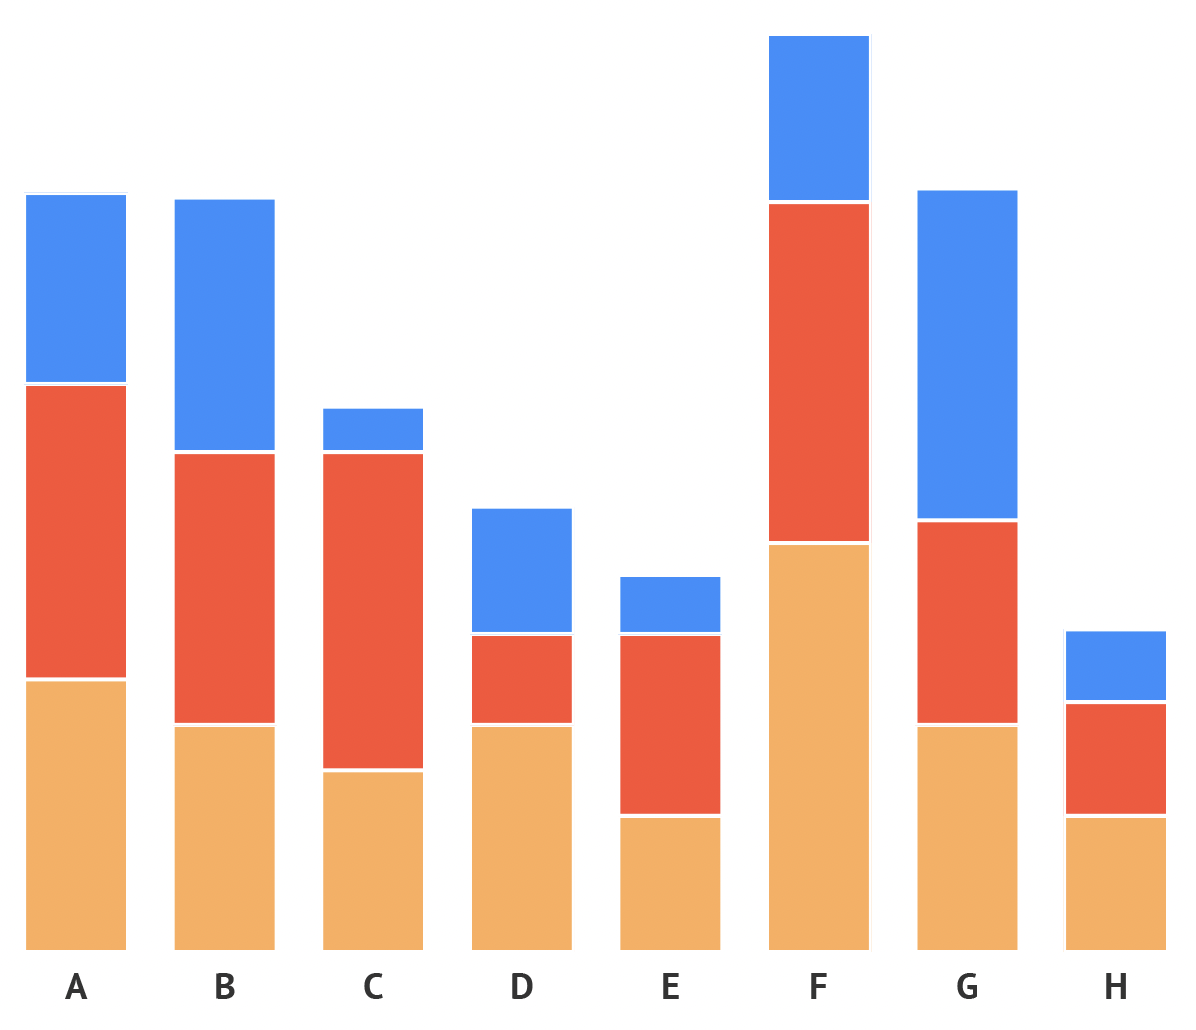 A stacked bar chart with 3 series, coloured in blue, red and pink-orange